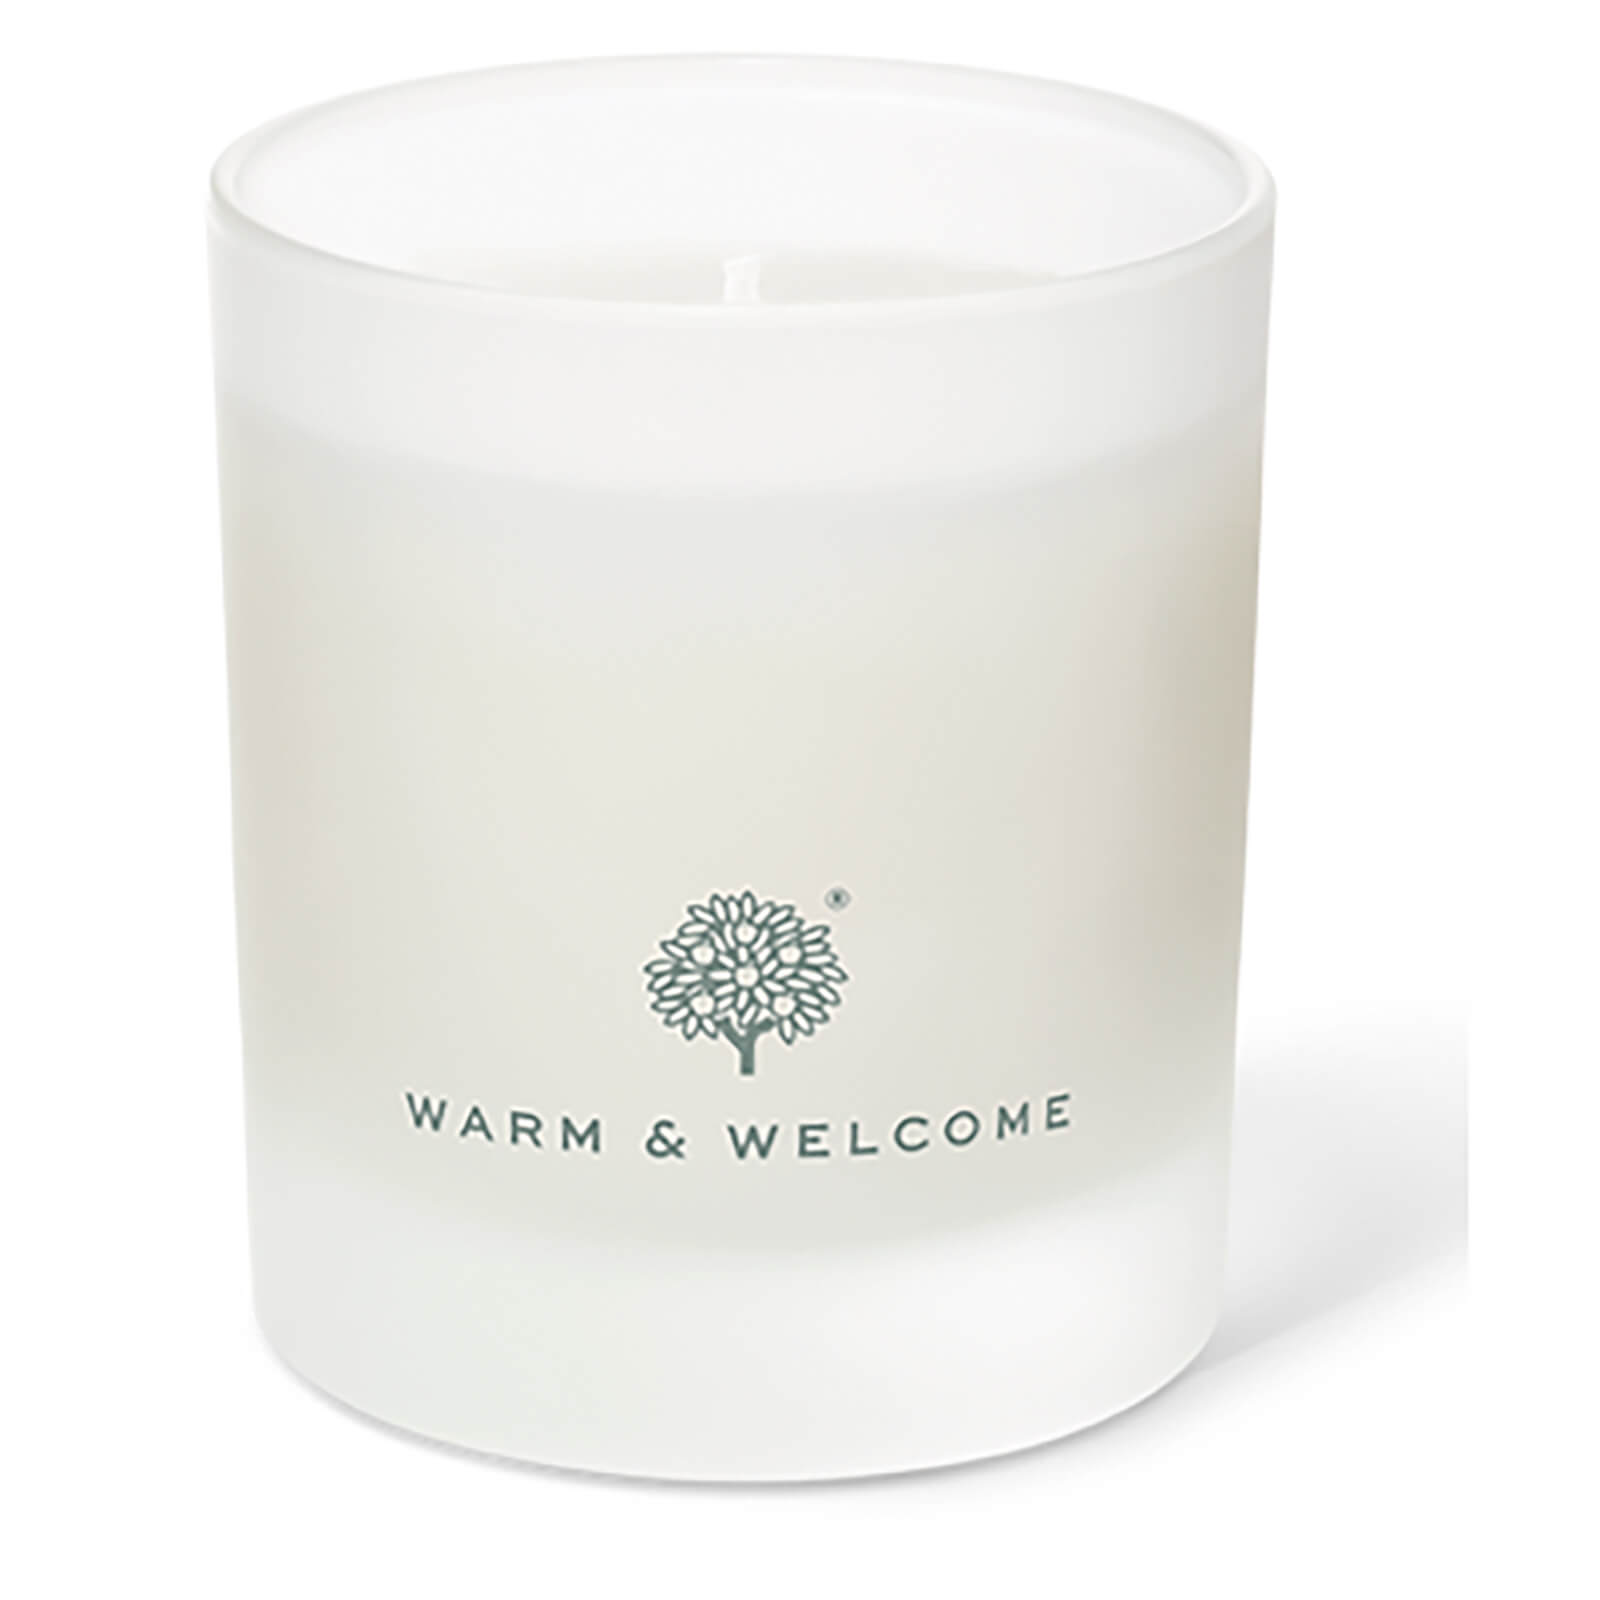 Vela Warm and Welcome de Crabtree & Evelyn 200 g